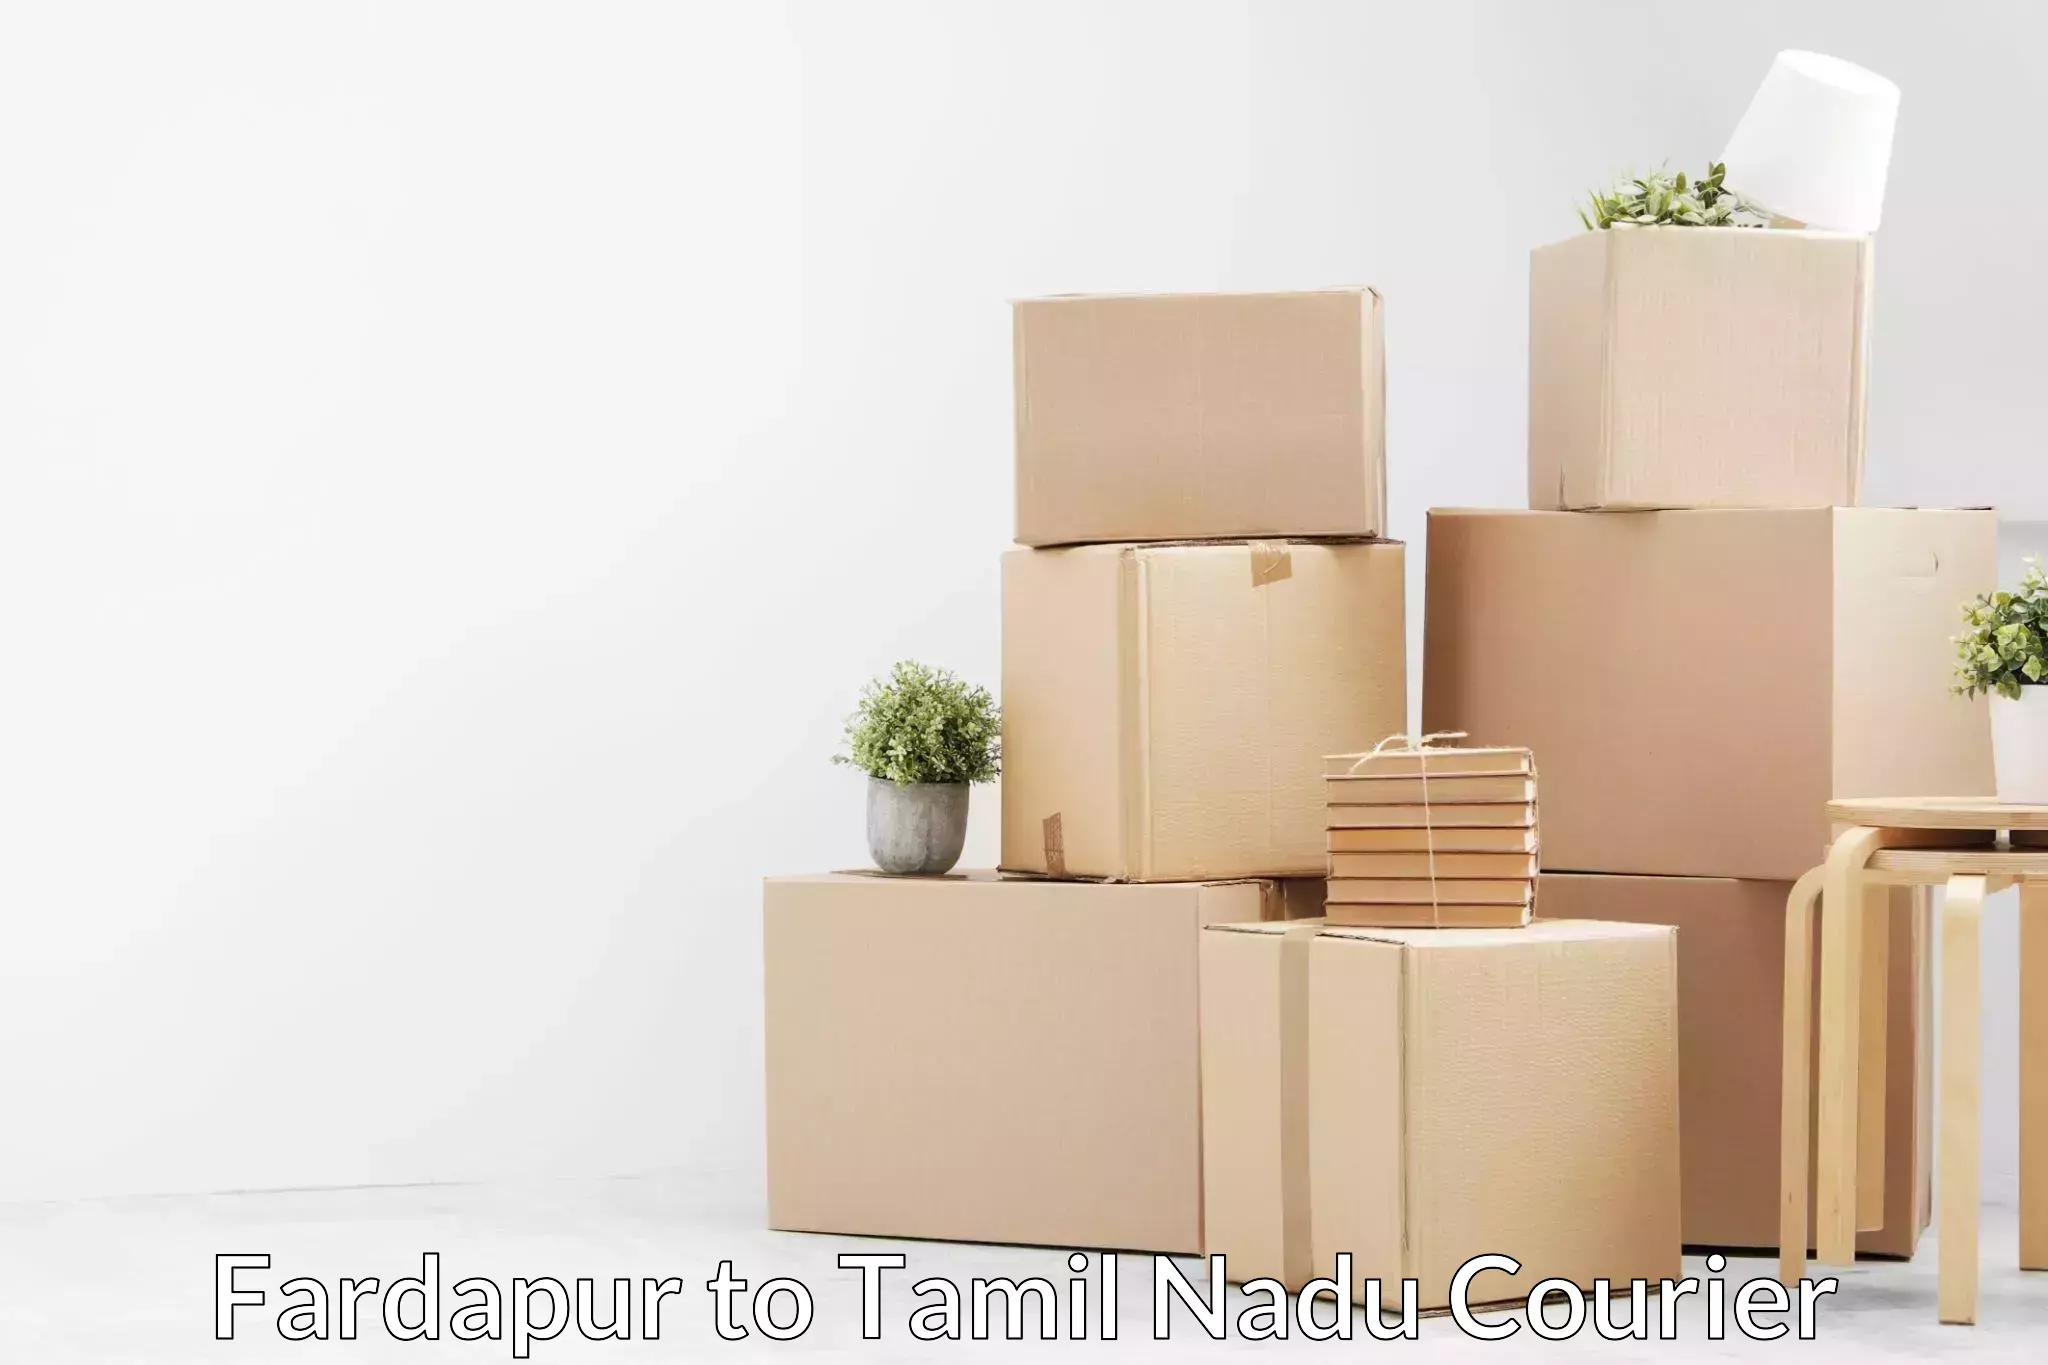 Professional moving assistance in Fardapur to Tamil Nadu